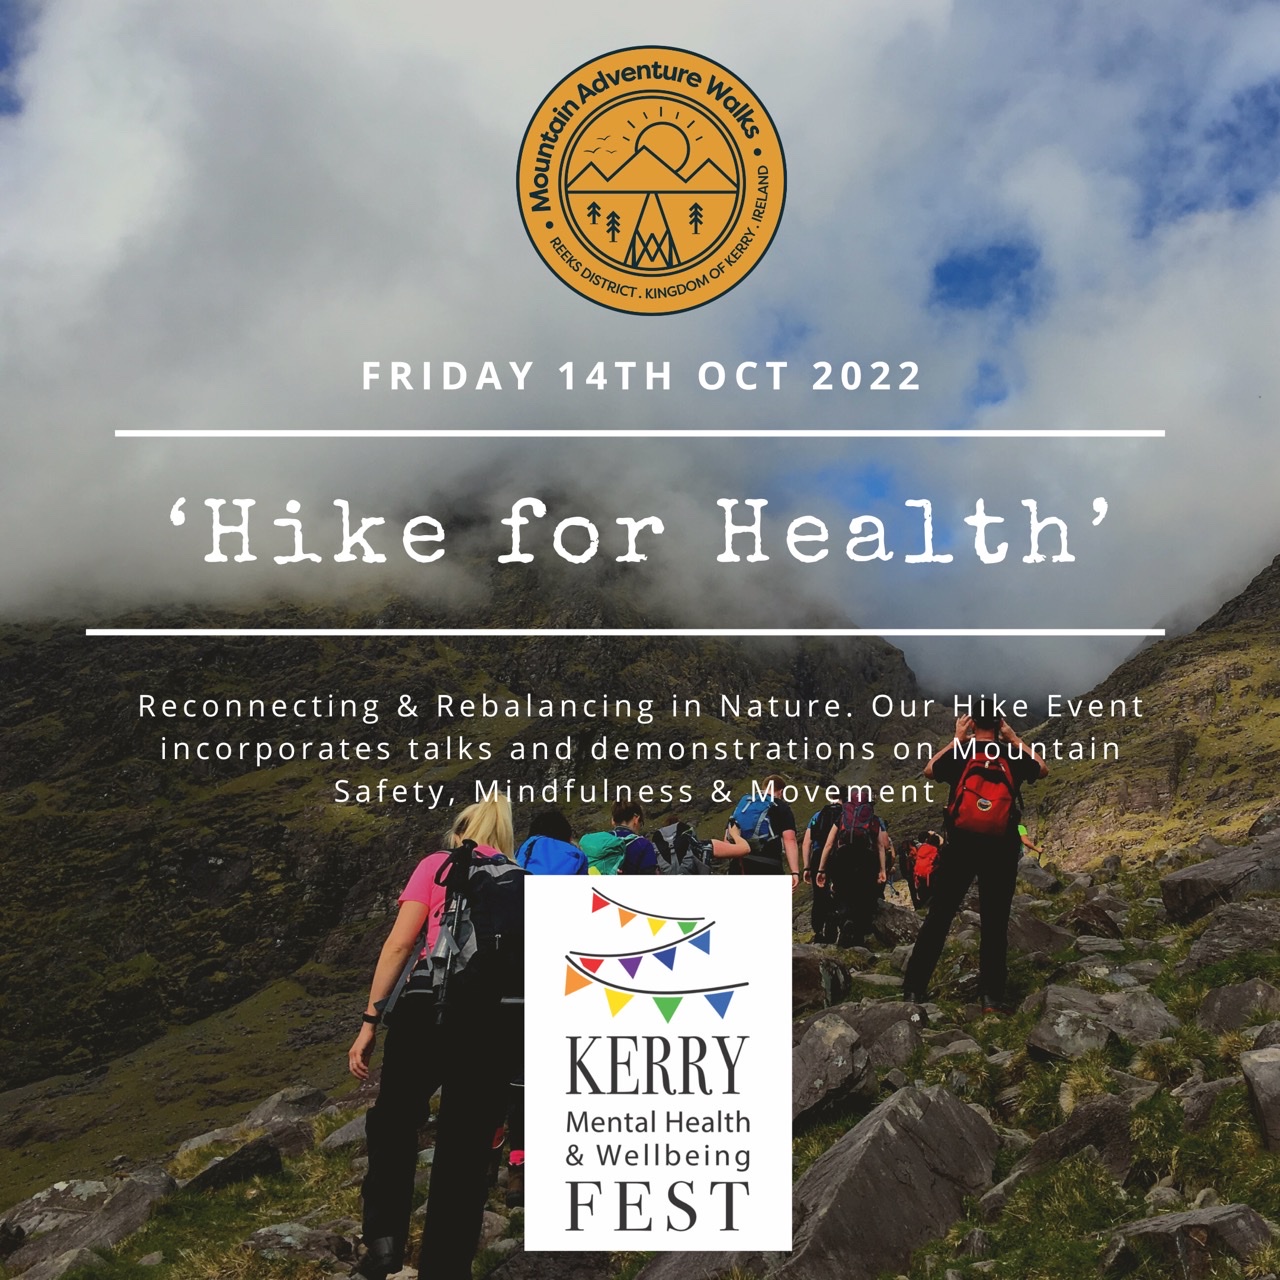 Hike for Health event at Kerry Mental Health & Wellbeing Fest 2022